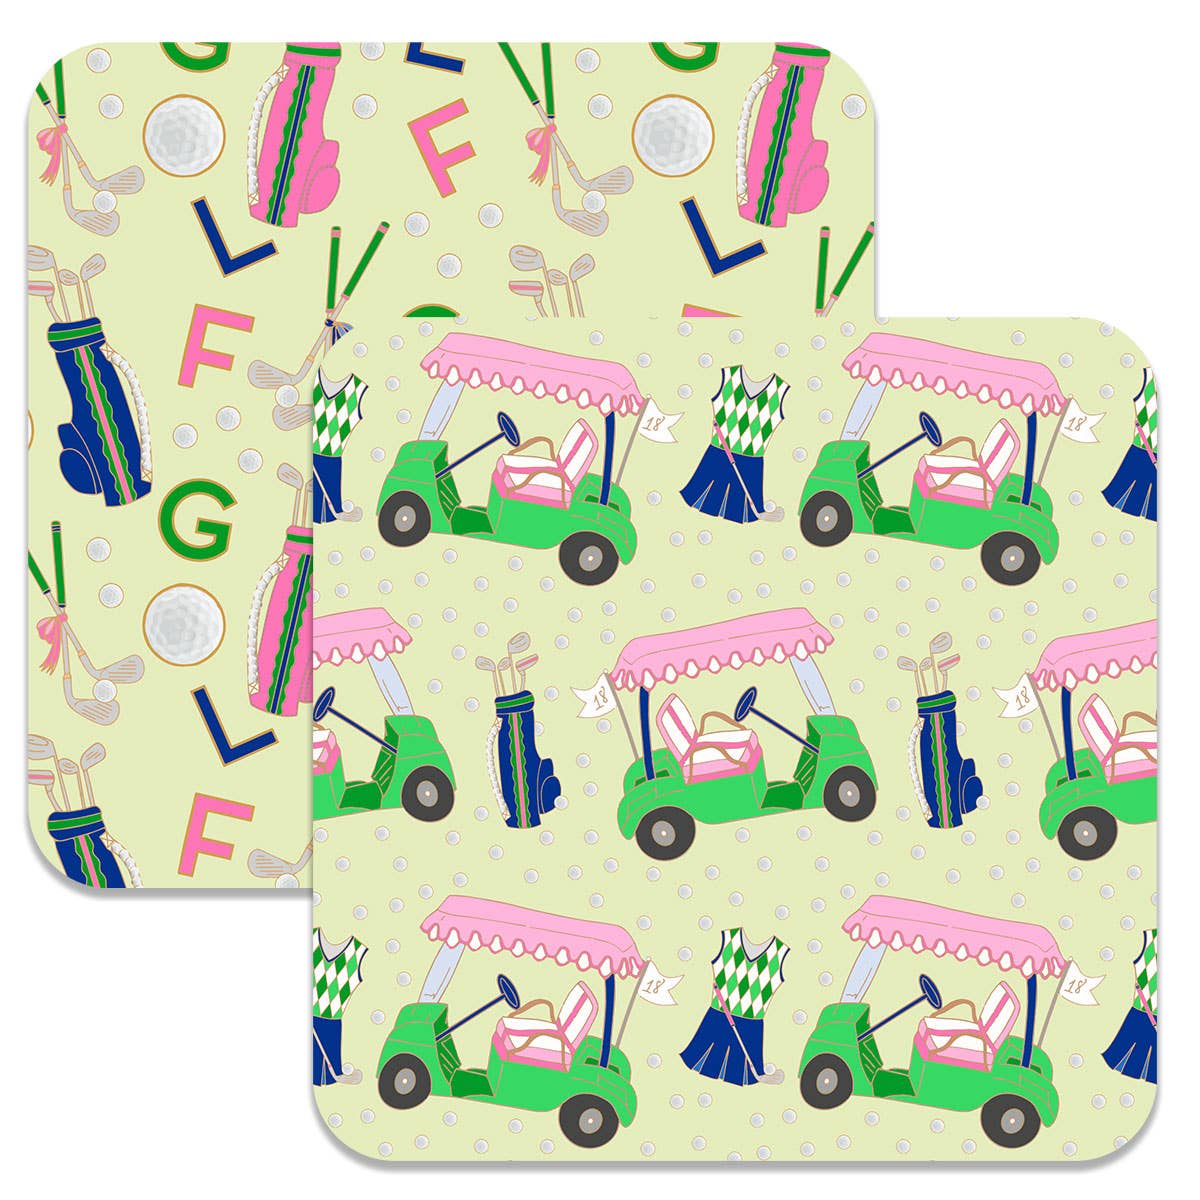 Canvas Style - Preppy Golf Double-Sided Thick Paper Coasters (Set of 8)